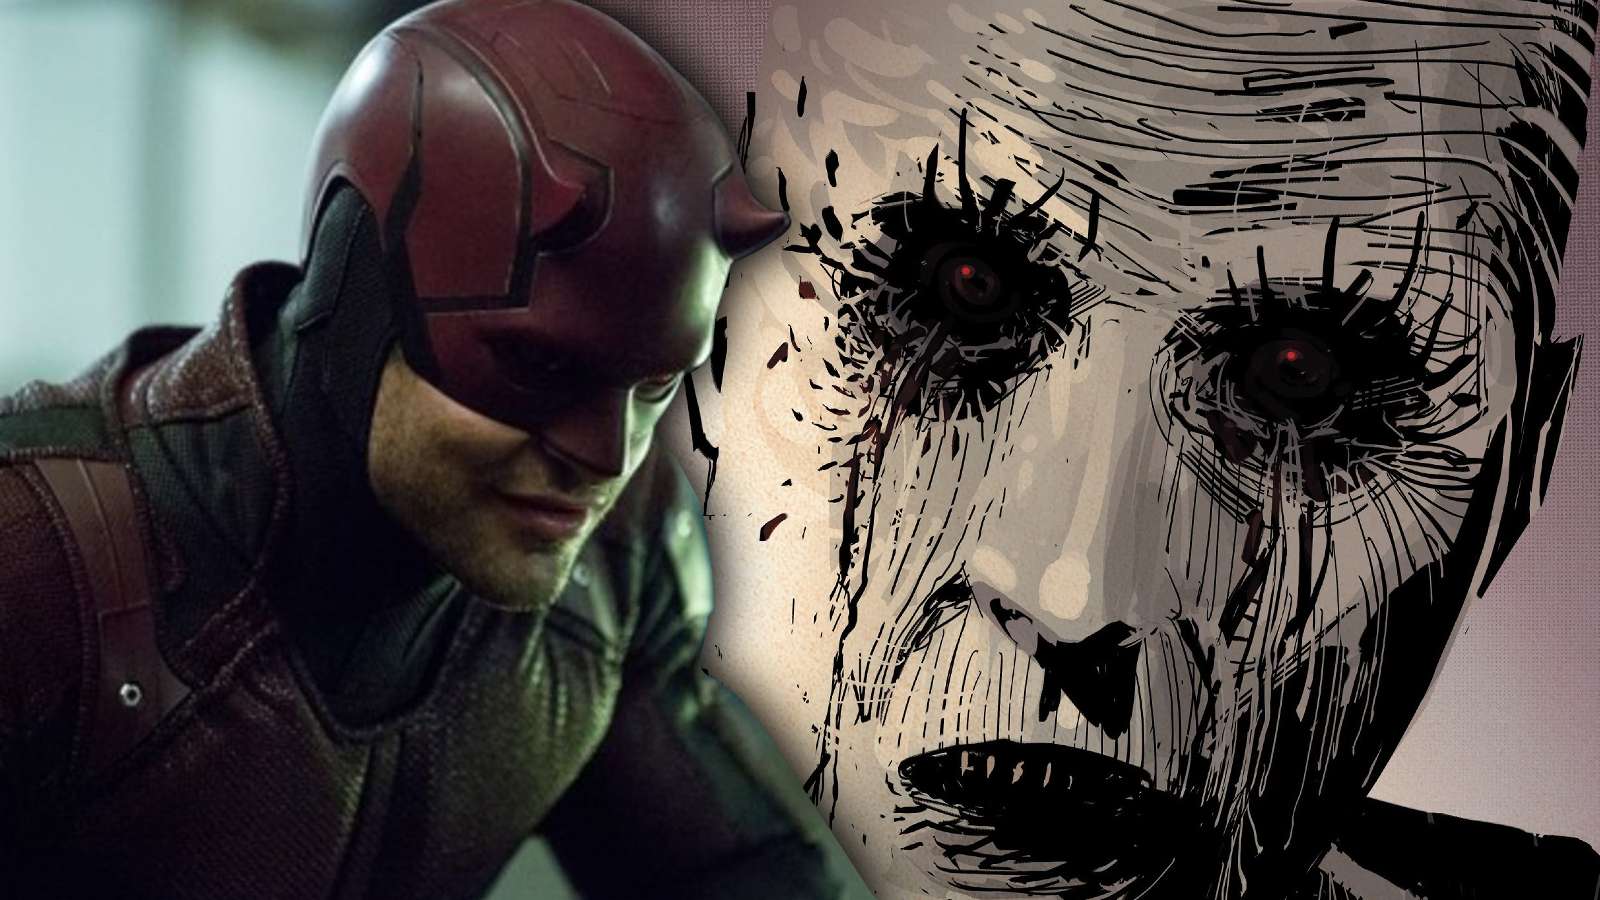 Charlie Cox as Daredevil and comic artwork of Muse